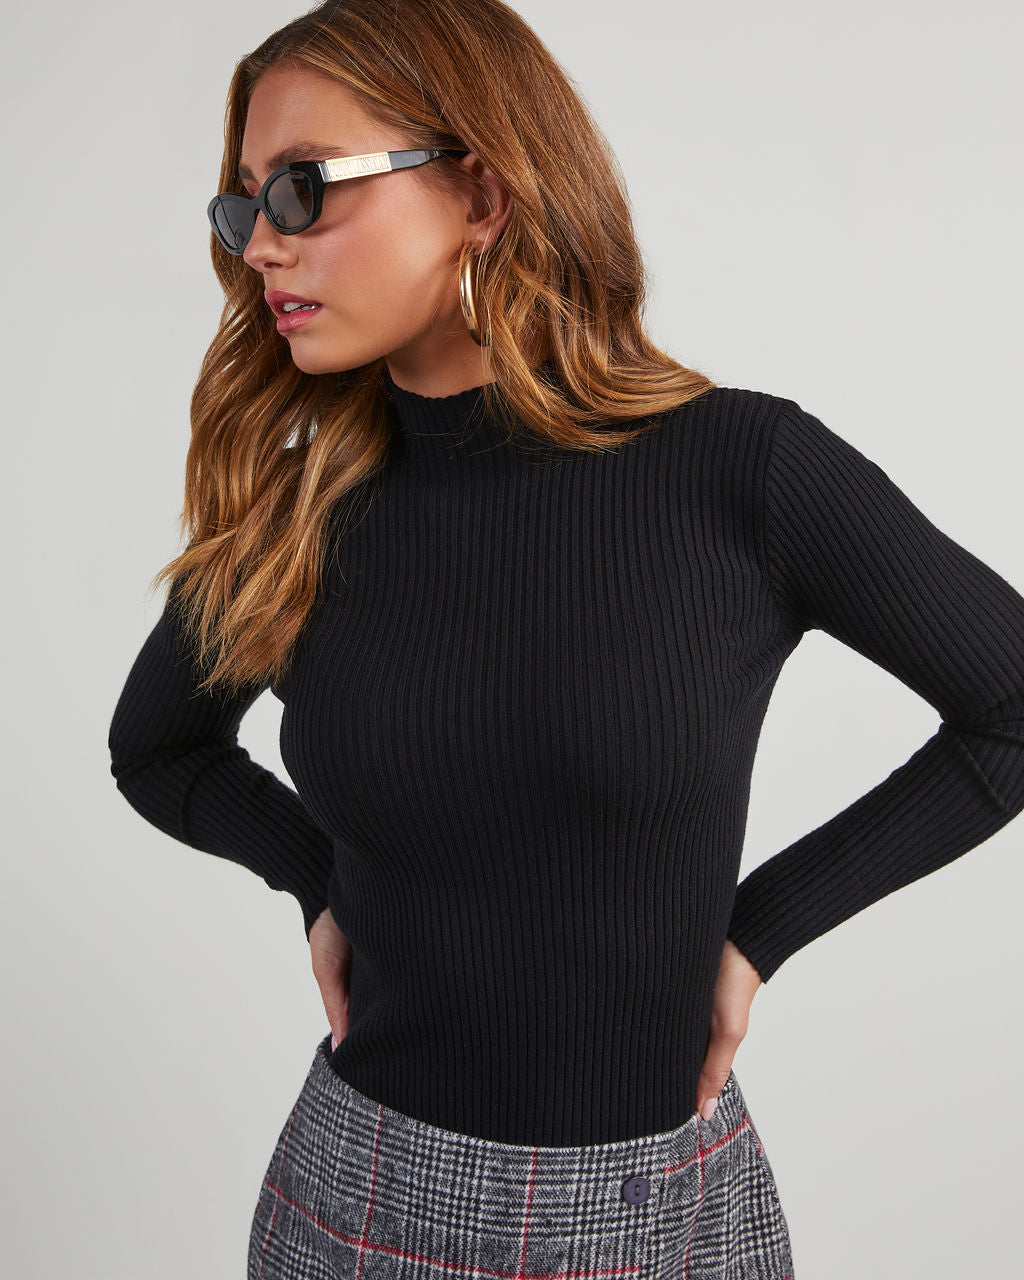 Moino Clay Puffy Sleeve Turtleneck Sweater